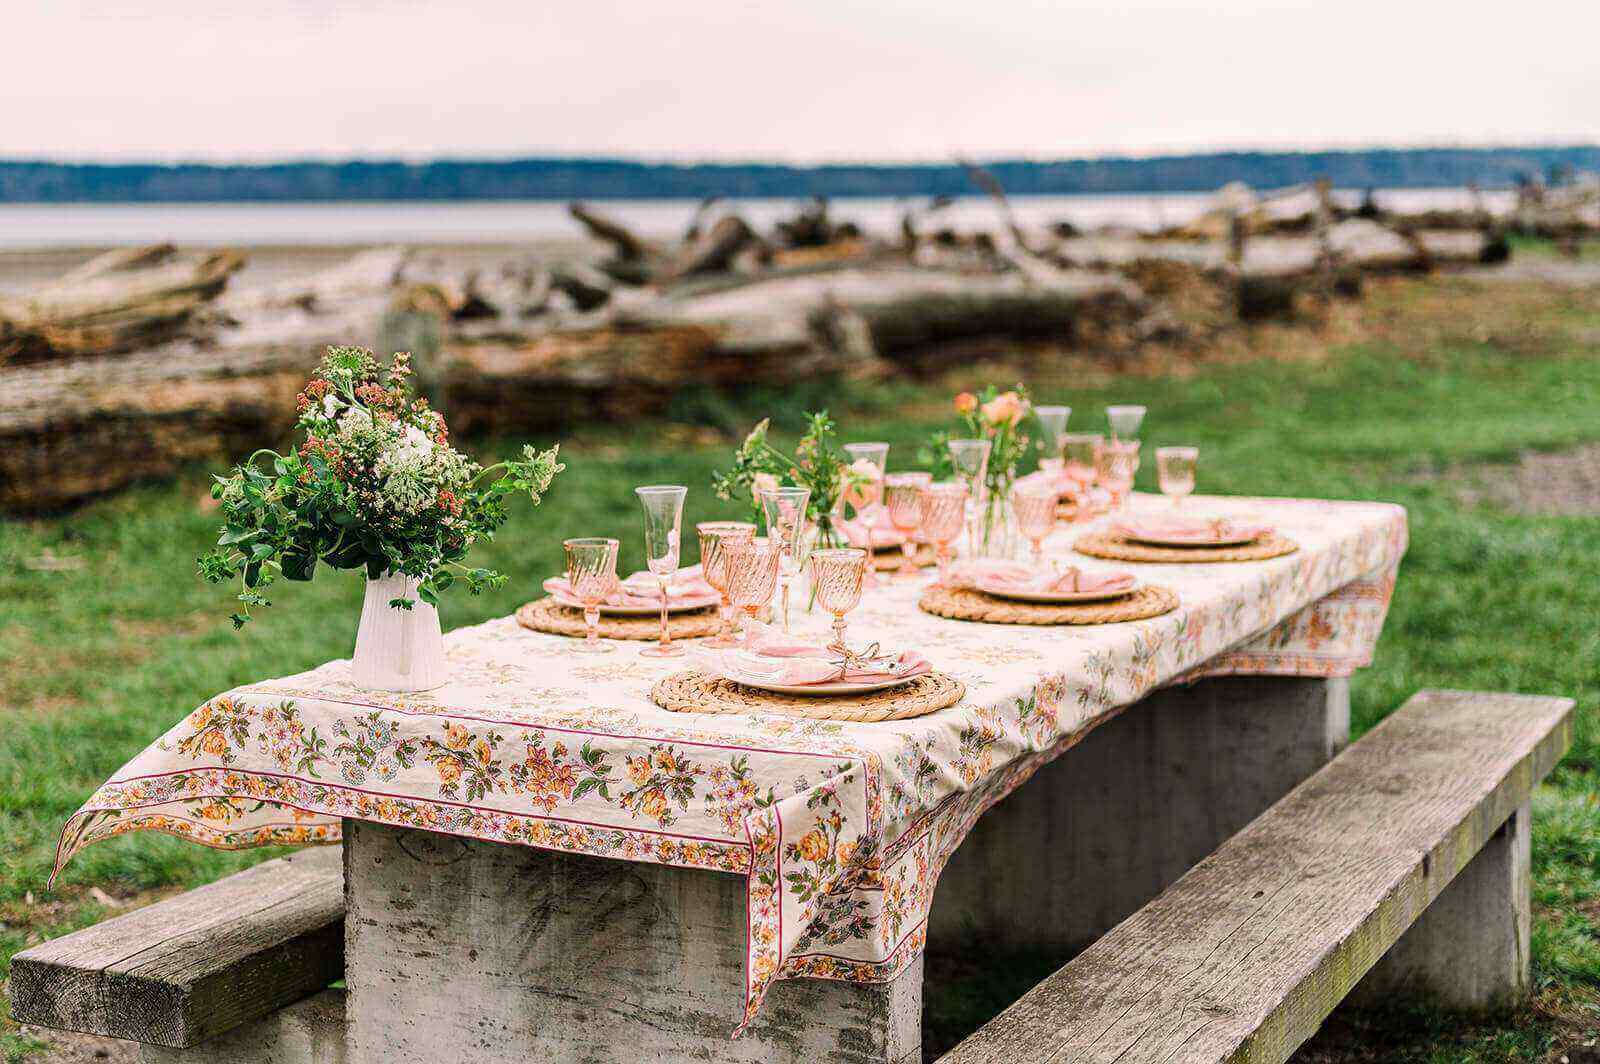 Beachside picnic set up. Wooden picnic bench seating, blush glassware, flowers in a white jug, wicker placemats, pink napkins tied with string, patterned crockery and a floral patterned table cloth